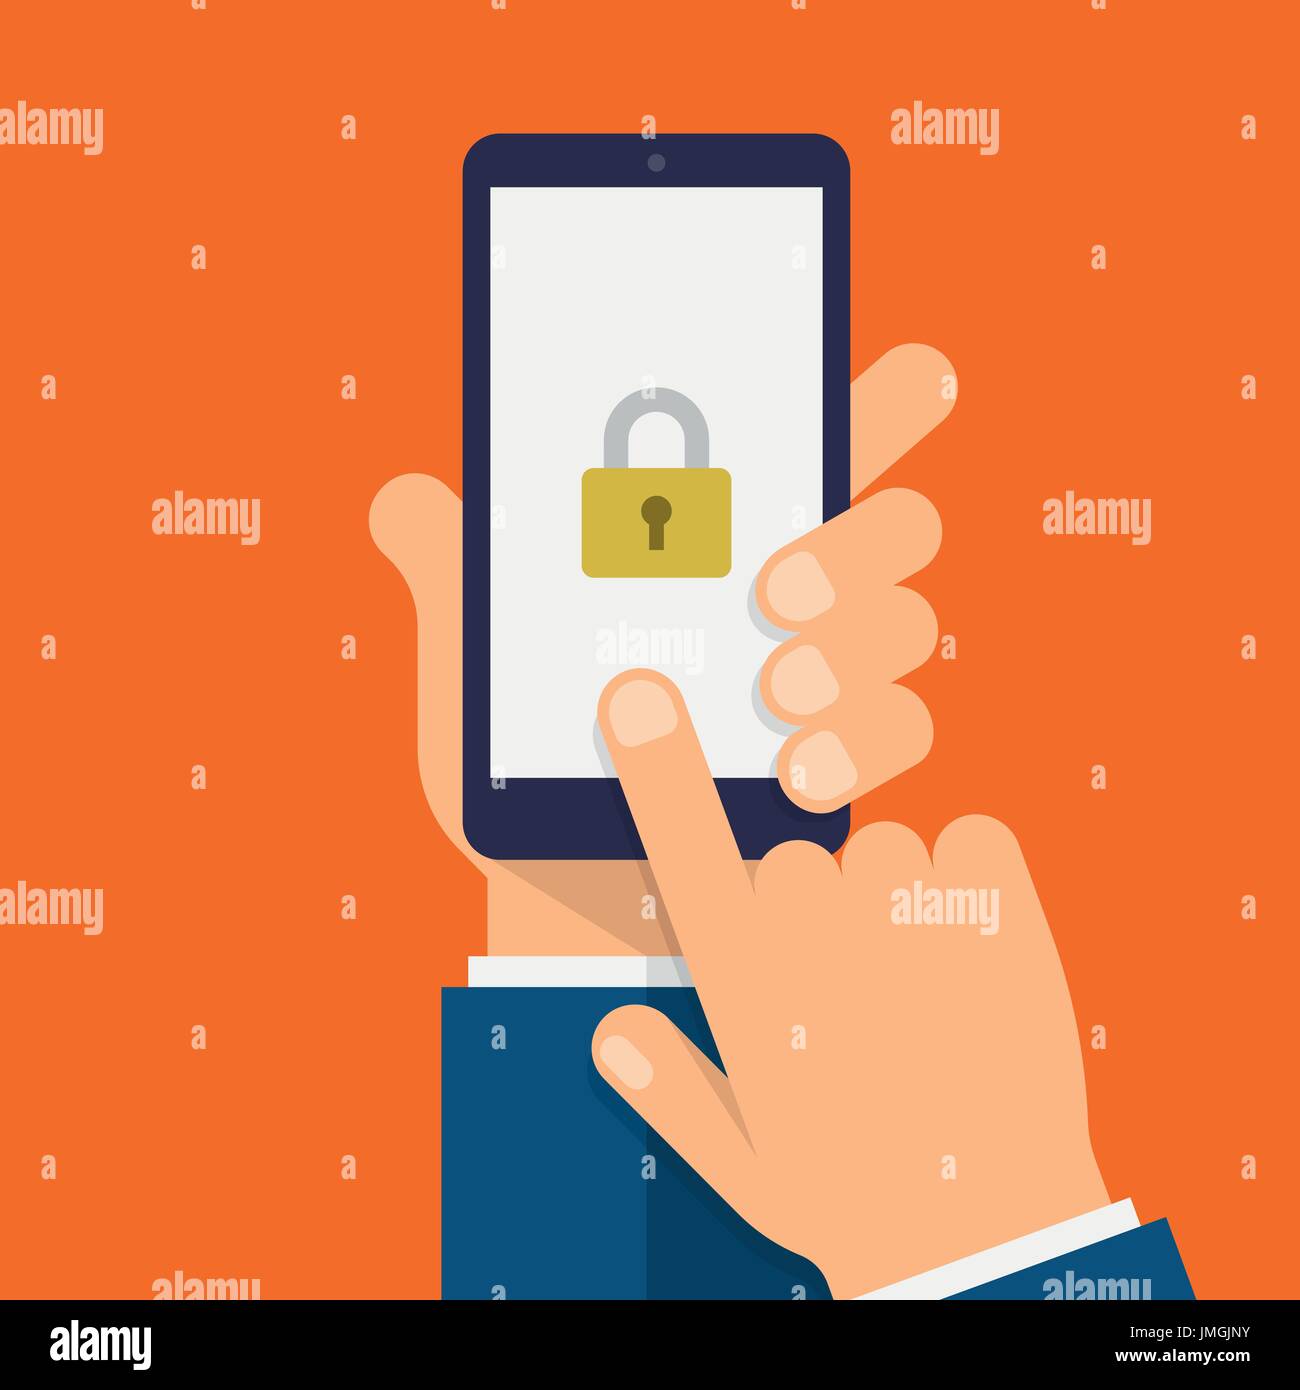 Lock on smartphone screen. Hand holds the smartphone and finger touches screen. Modern Flat design illustration. Stock Vector